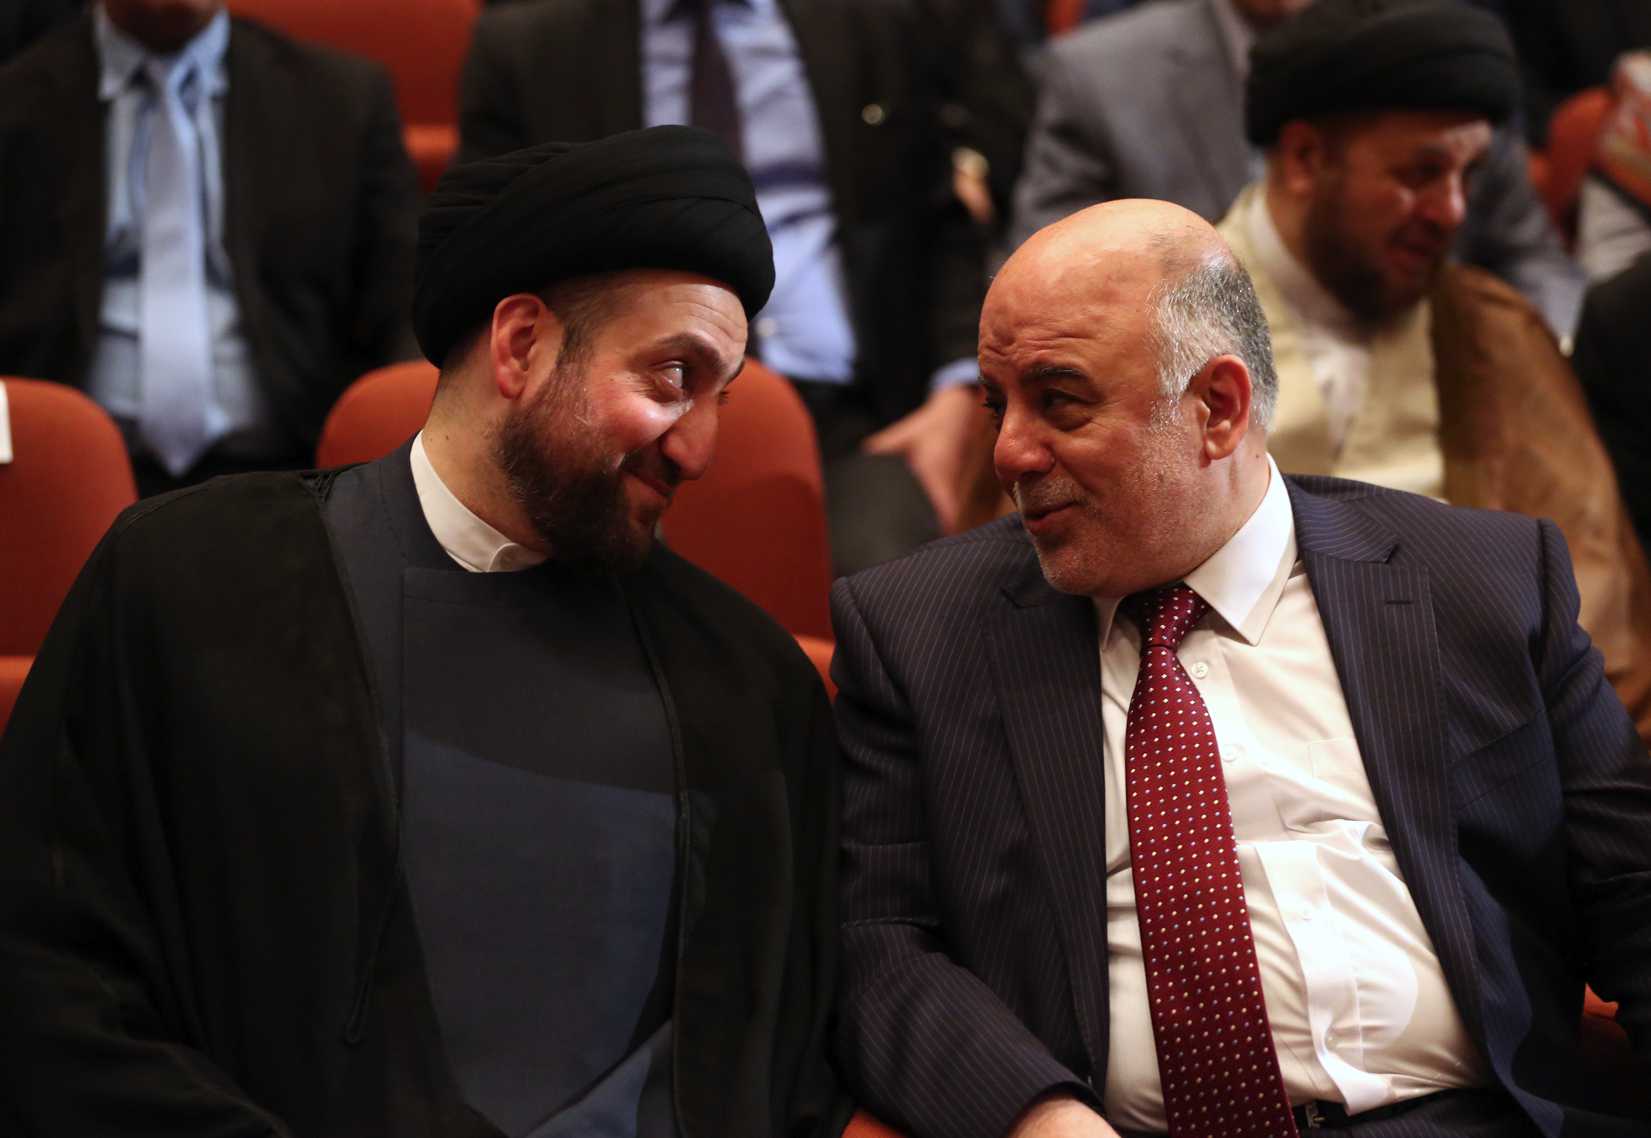 Iraq's new Prime Minister Haider al-Abadi, right, and Ammar al-Hakim, left, the leader of the Supreme Islamic Council of Iraq, during the session to approve the new government in Baghdad on Sept. 8, 2014 (Hadi Mizban—AP)